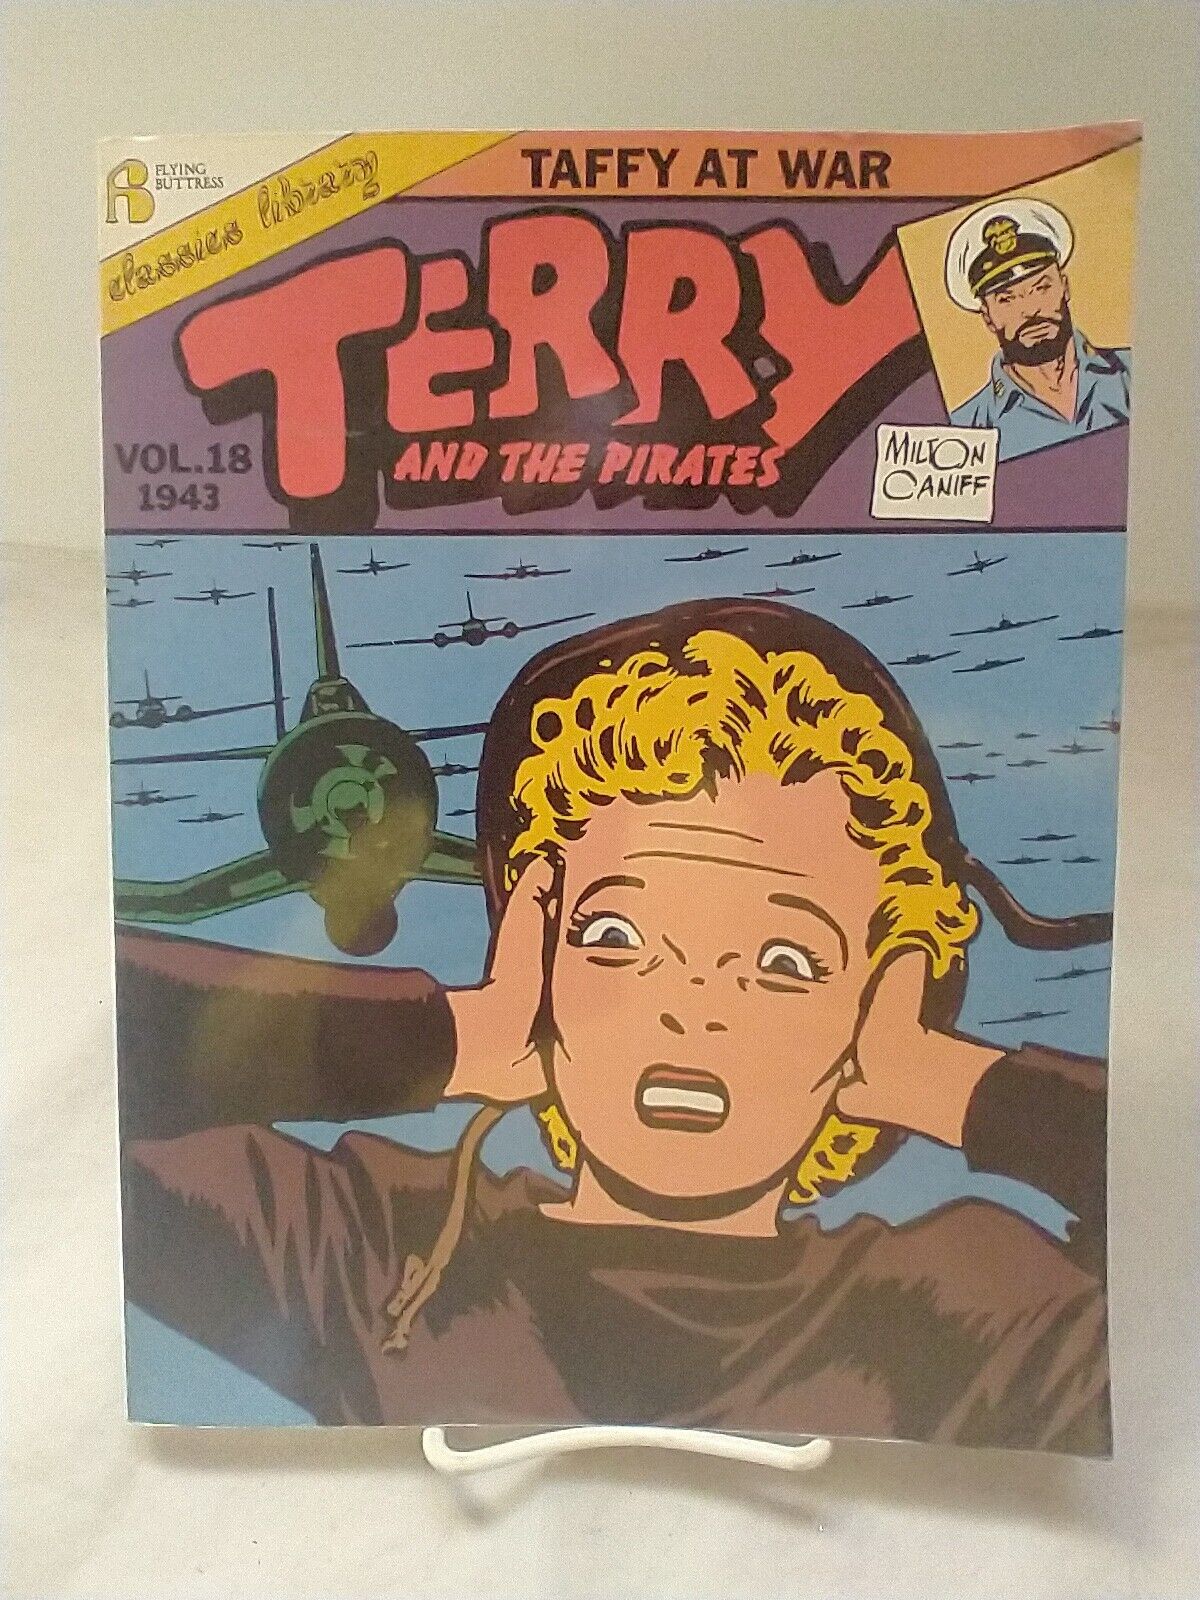 Terry and the Pirates Volume 18 by Milton Caniff Paperback